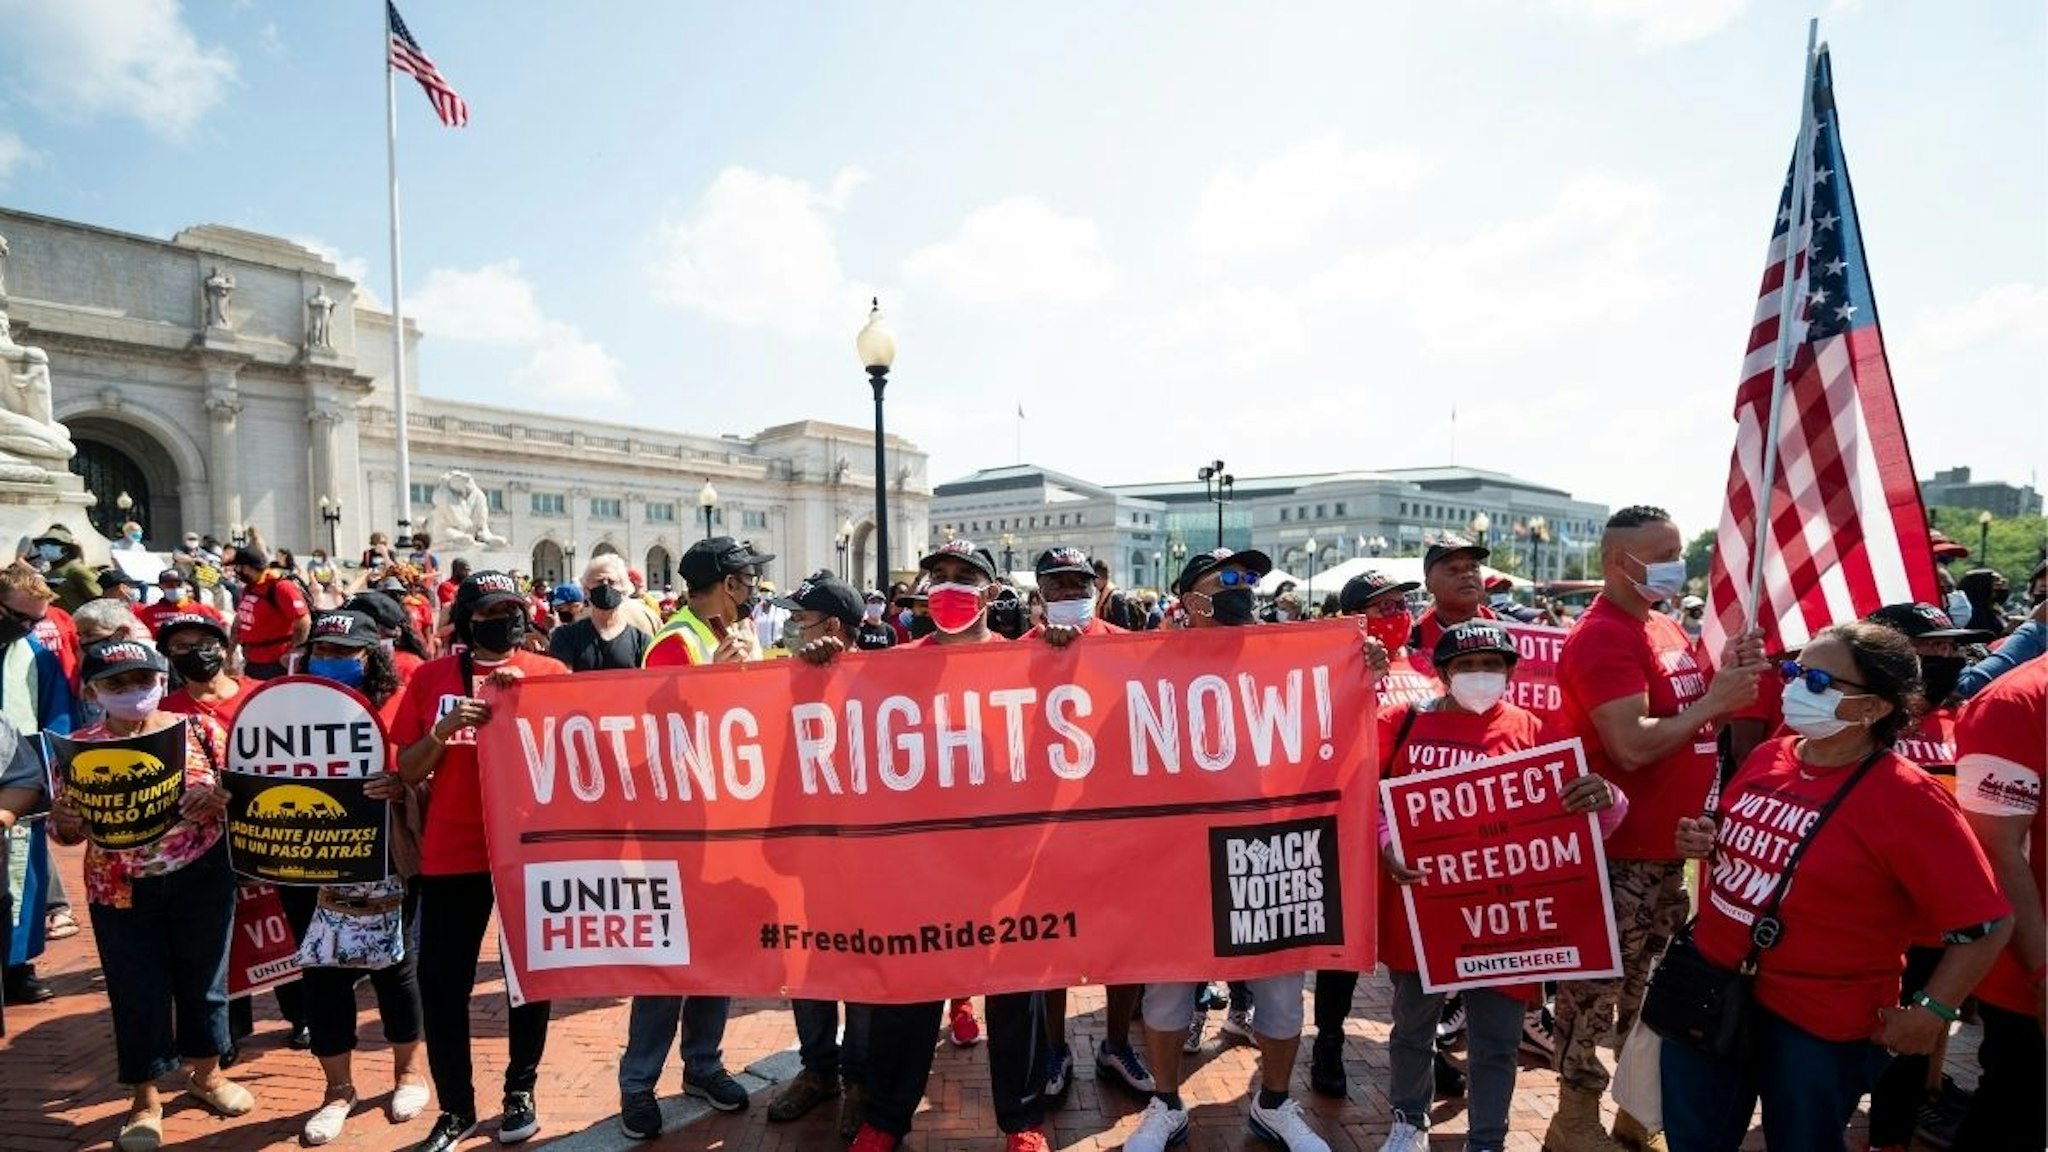 Rally attendees hold signs outside of Union Station in Washington as the Poor Peoples Campaign and the Unite union hold a rally and march to protest voter suppression laws on Monday, Aug. 2, 2021.